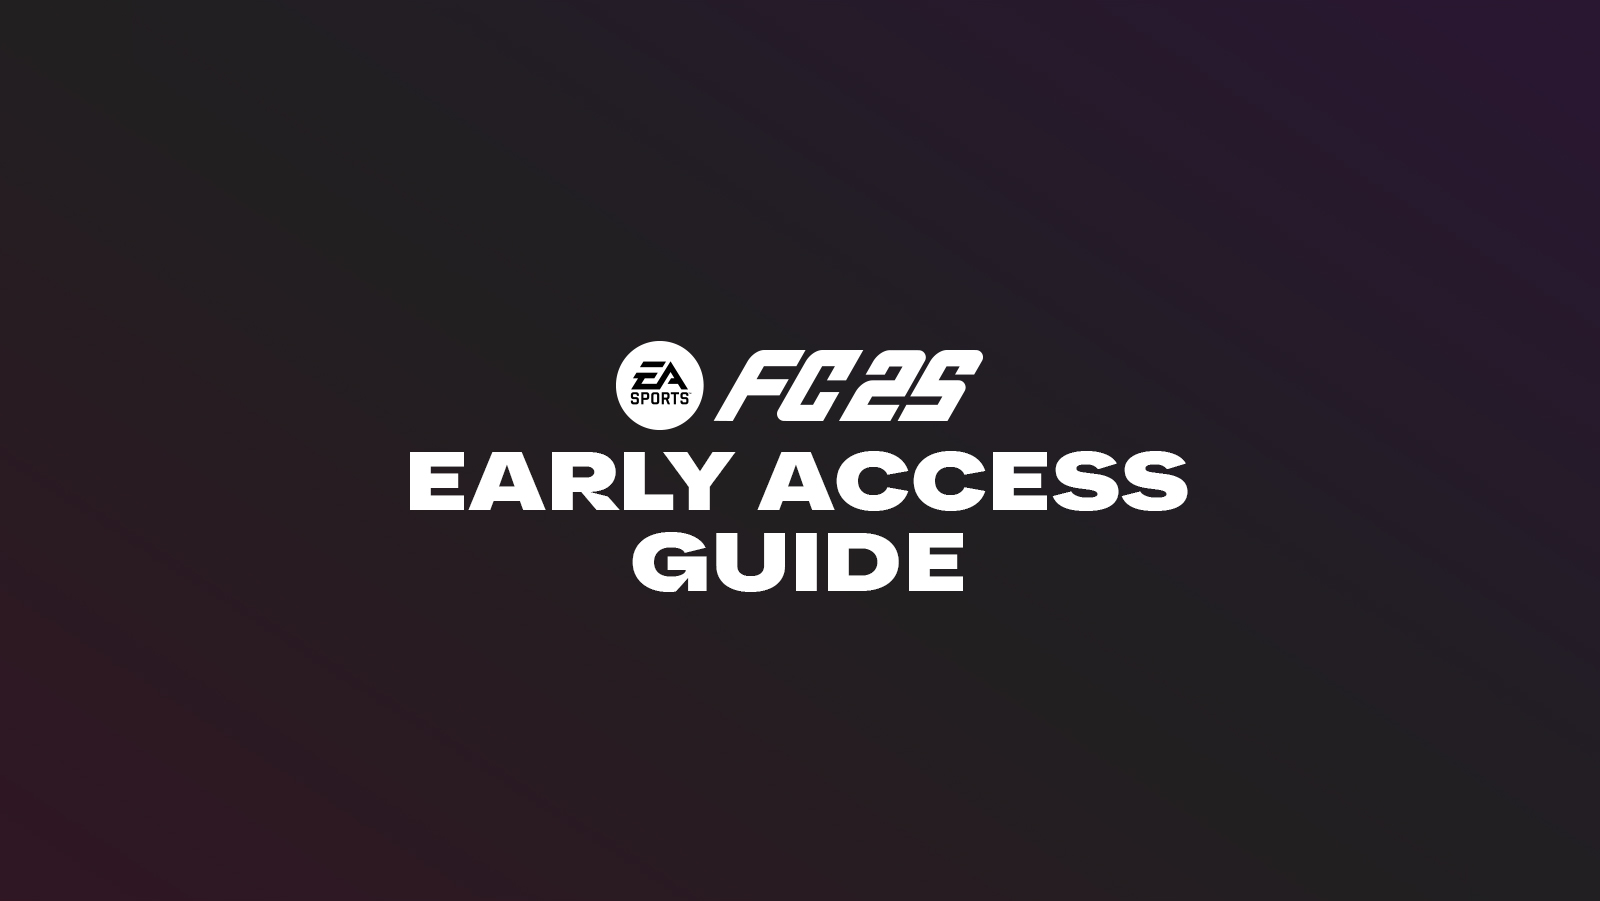 Early Access to FC 25